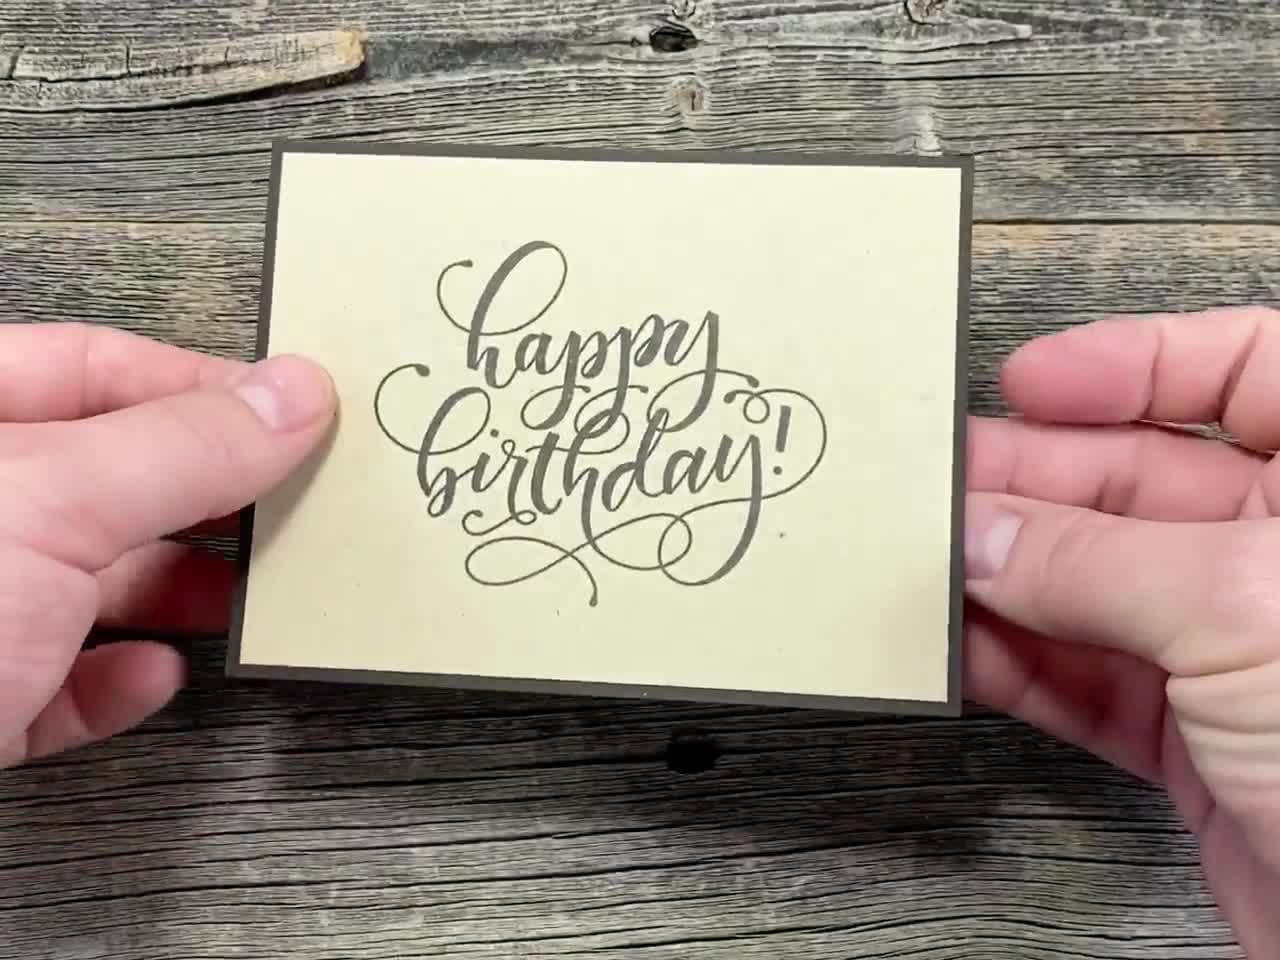 Cracked Designs - Roll Out the Barrel Birthday Card